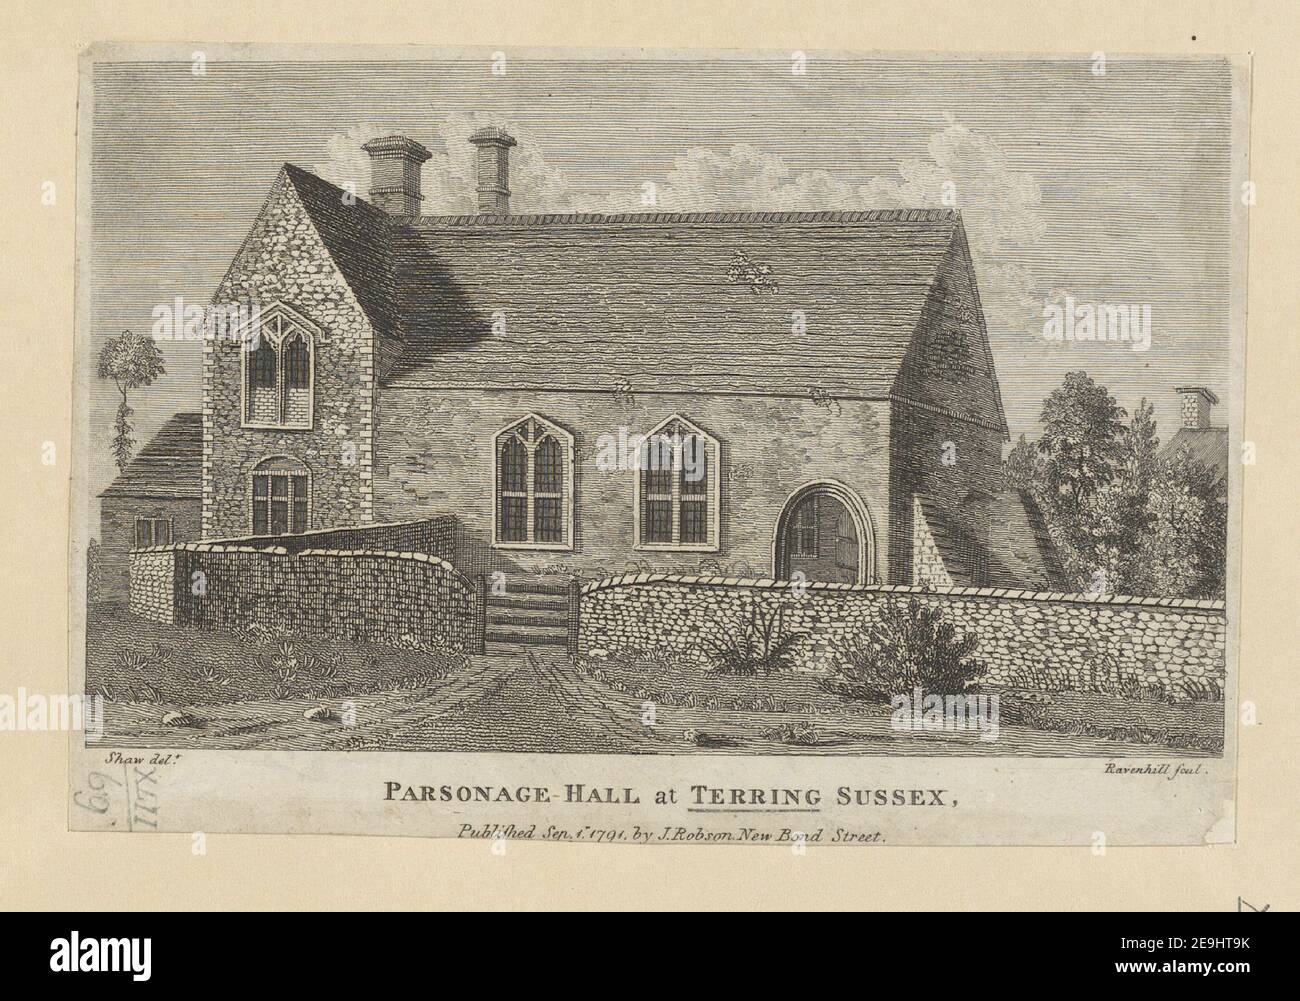 PARSONAGE HALL at TERRING SUSSEX.  Author  Ravenhill 42.69. Place of publication: [London] Publisher: Published Sep.r 1. 1791, by J. Robson, New Bond Street., Date of publication: [1791]  Item type: 1 print Medium: etching Dimensions: sheet 11.7 x 17.2 cm [trimmed within platemark].  Former owner: George III, King of Great Britain, 1738-1820 Stock Photo